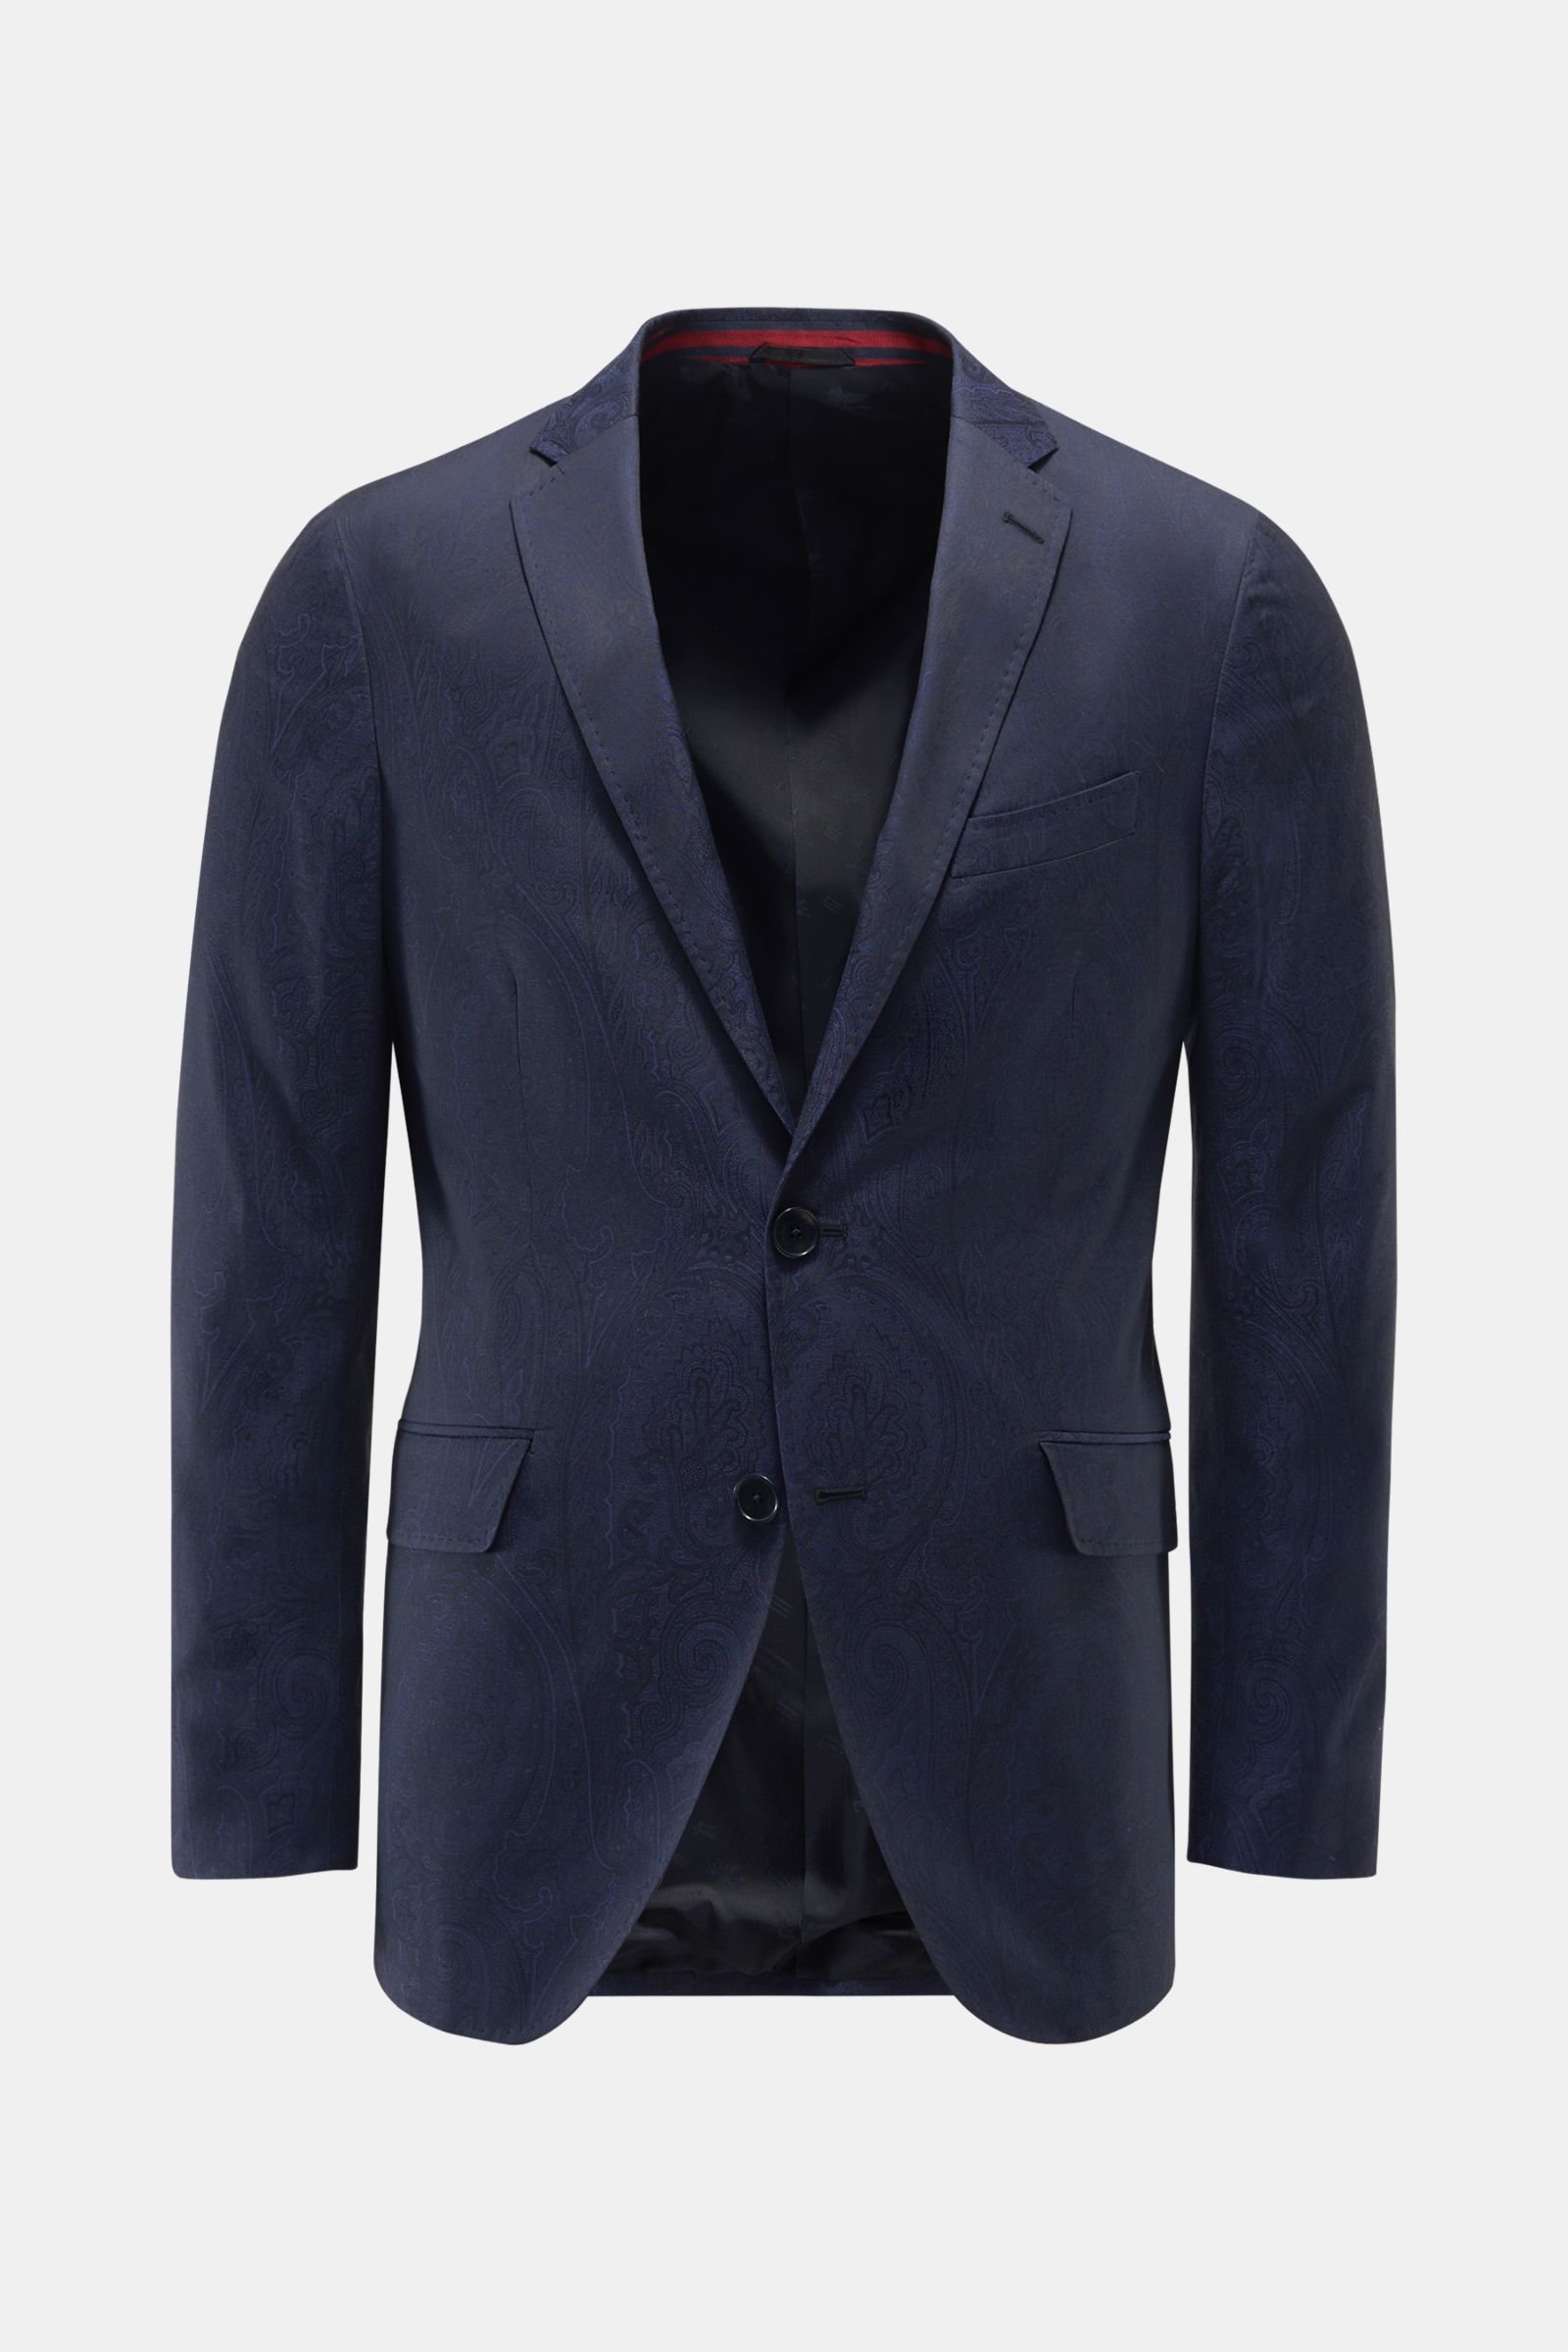 Smart-casual jacket navy patterned